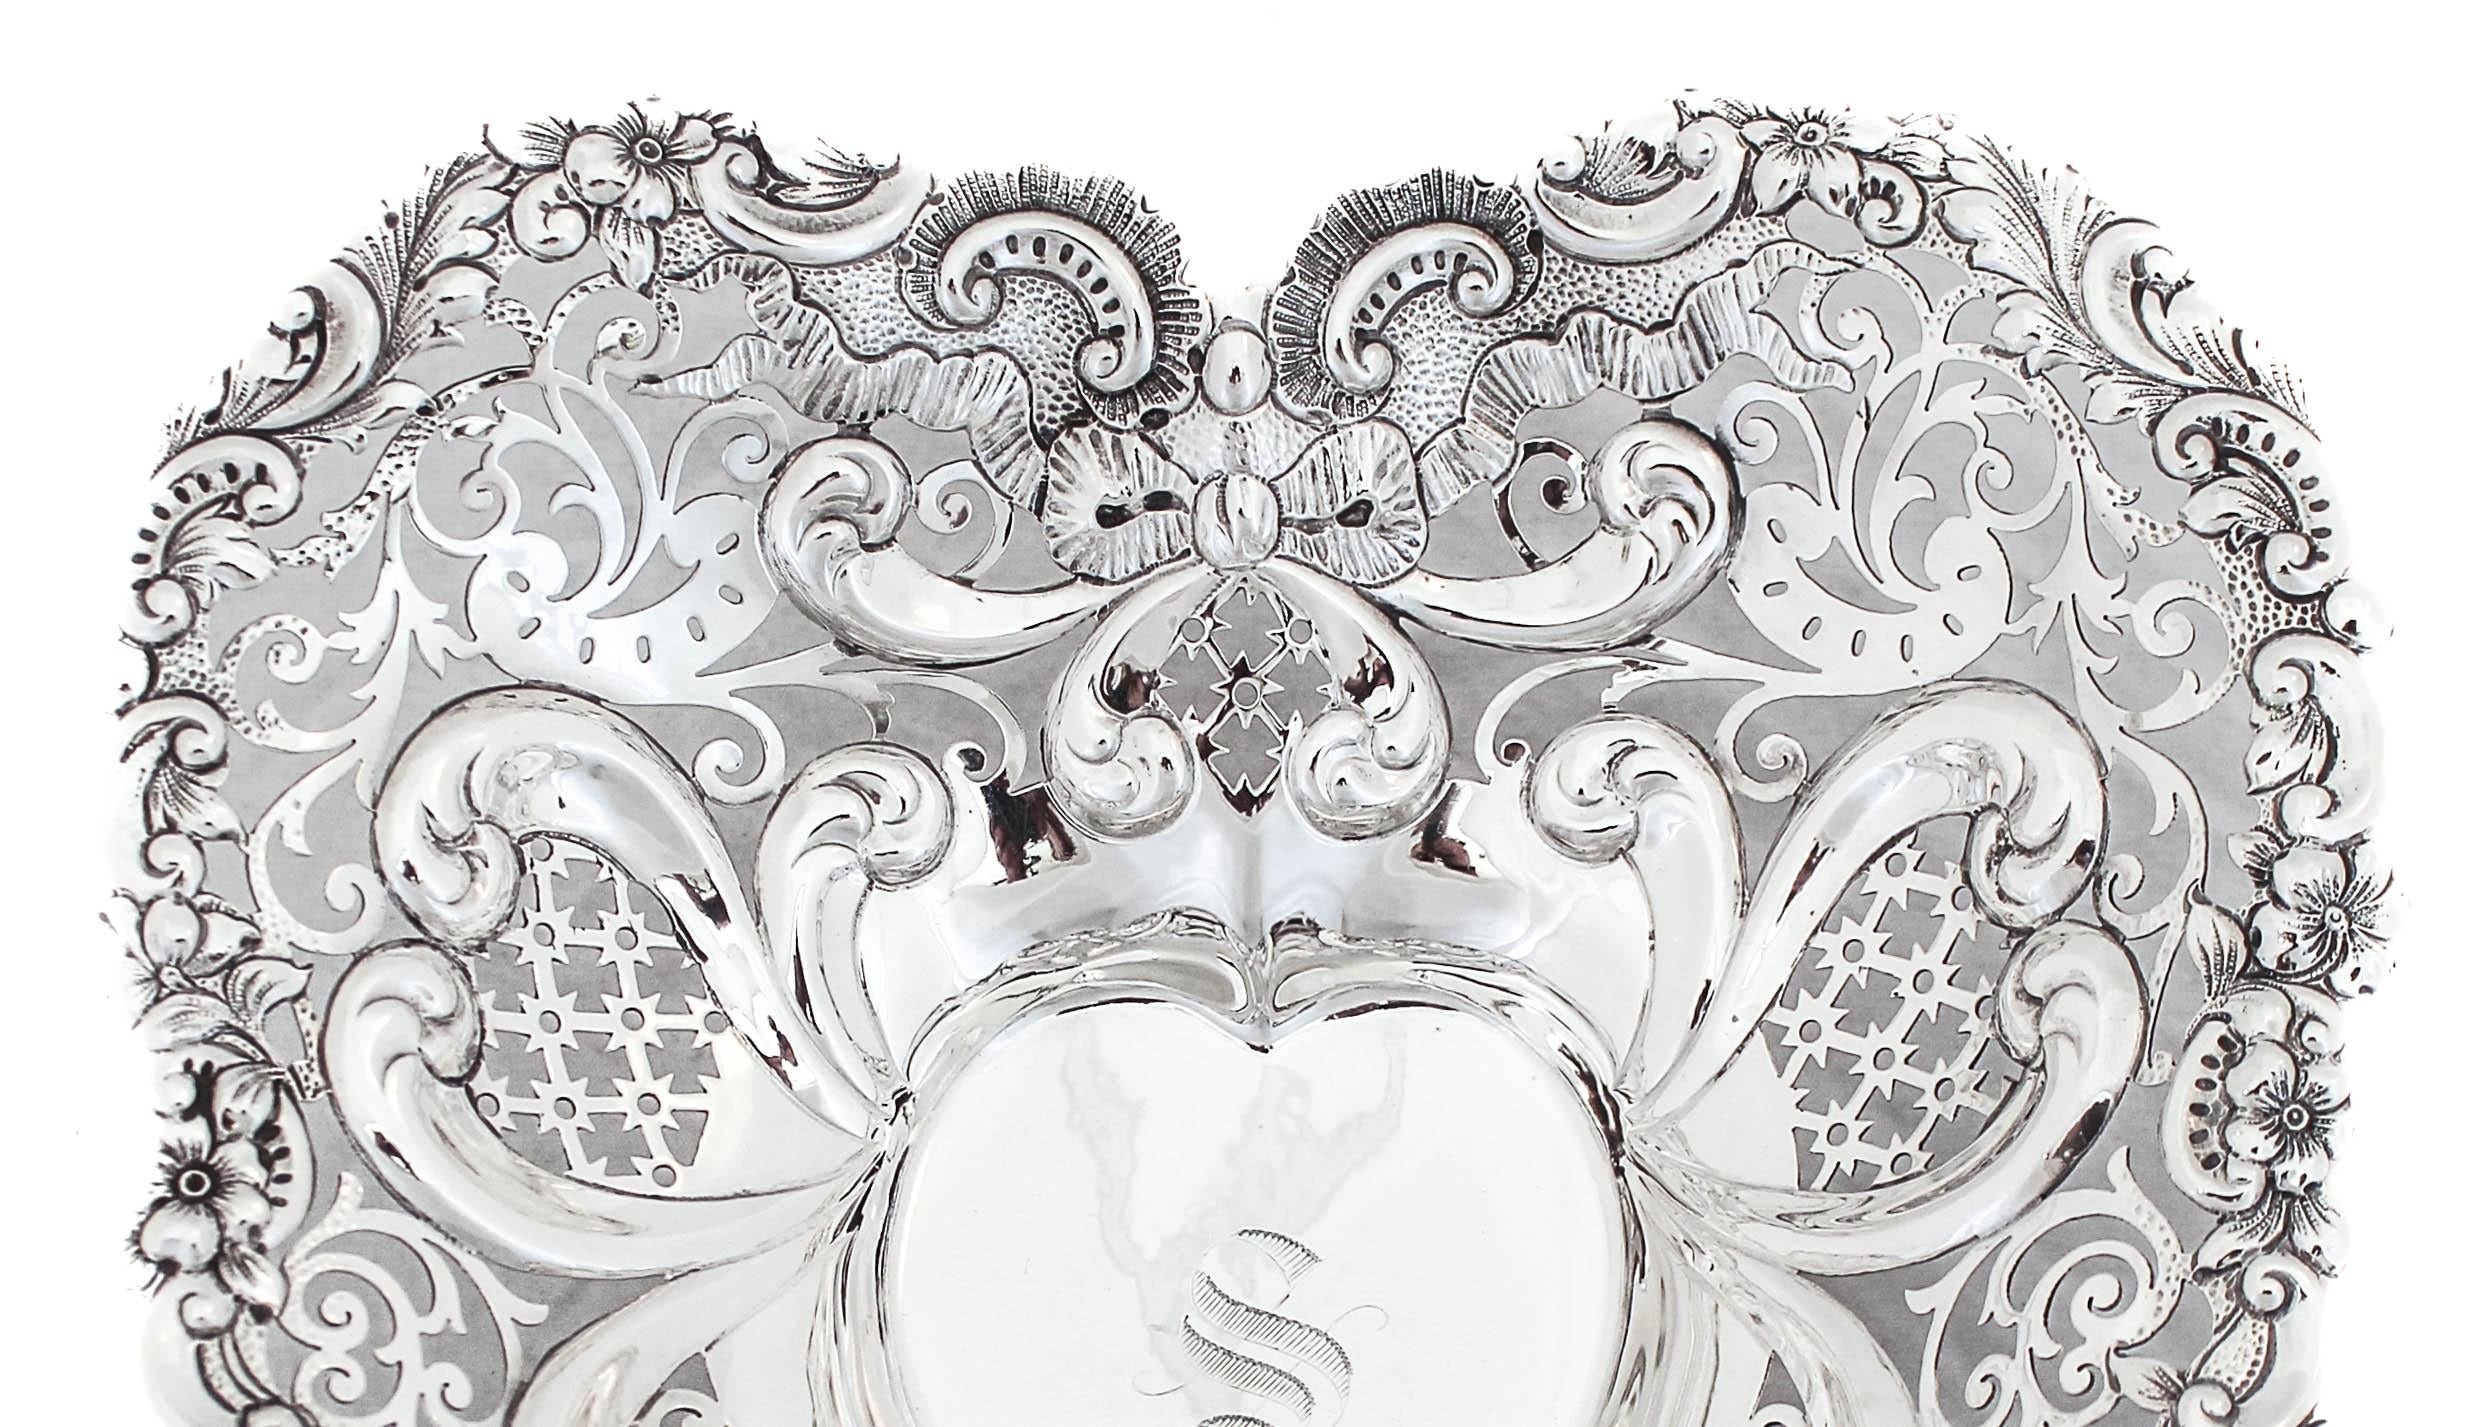 Being offered is a heart shaped dish made by Gorham Silversmiths of Providence, Rhode Island and hallmarked 1893 (one hundred and thirty one years old)!!  It has rich, old-world grace with its reticulated work and elaborate floral pattern.  It